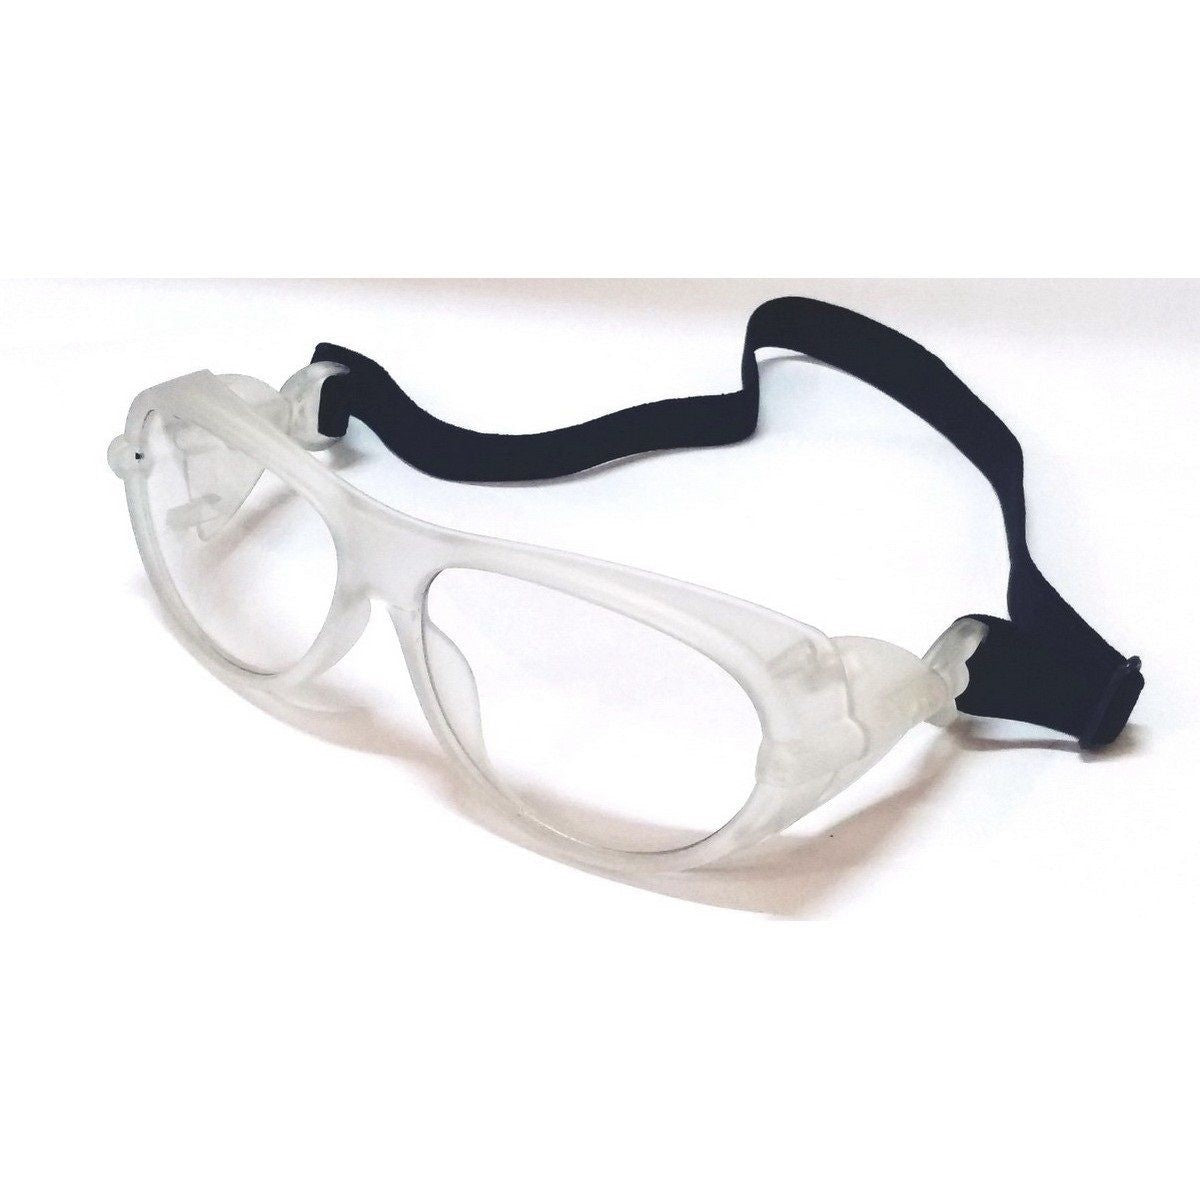 Clear Prescription Sports Eyewear Safety Glasses Driving Glasses with Strap Band